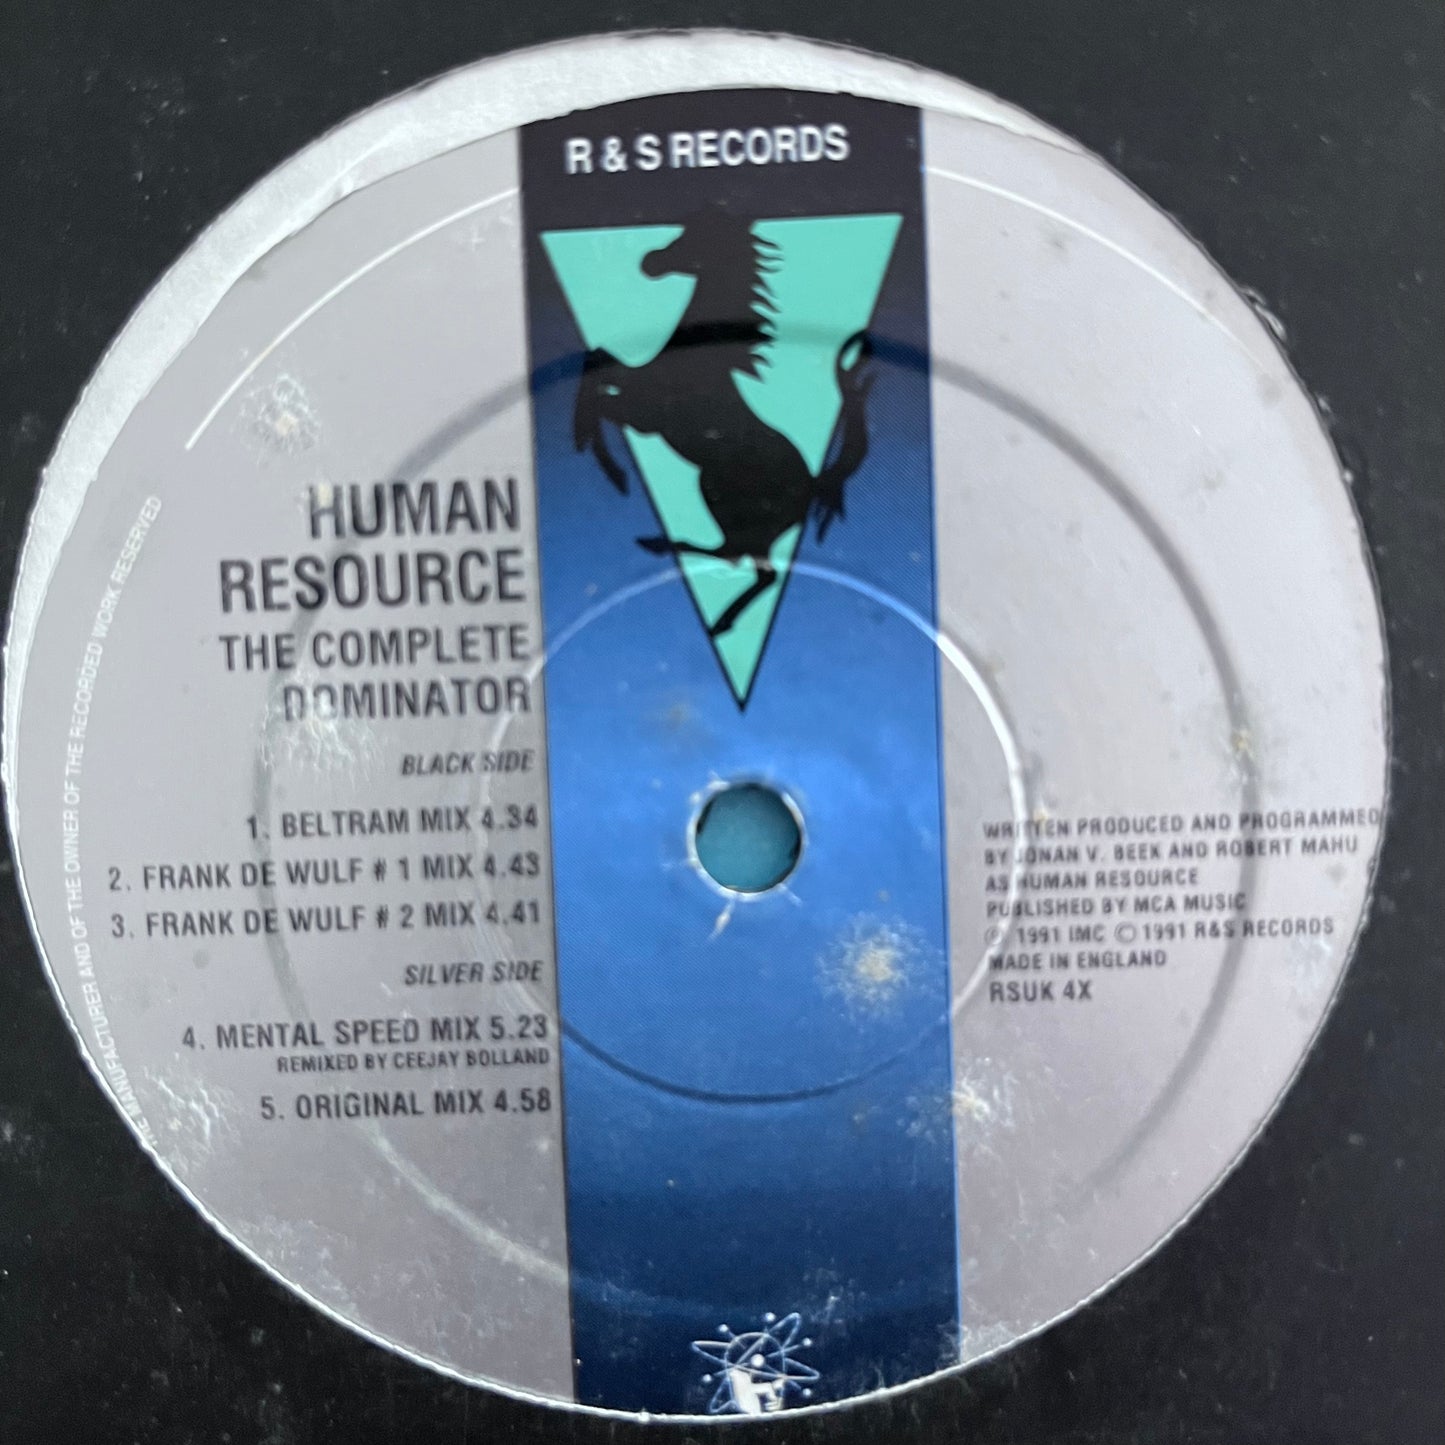 Human Resource “The Complete Dominator” 5 Track 12inch Vinyl on R&S Records